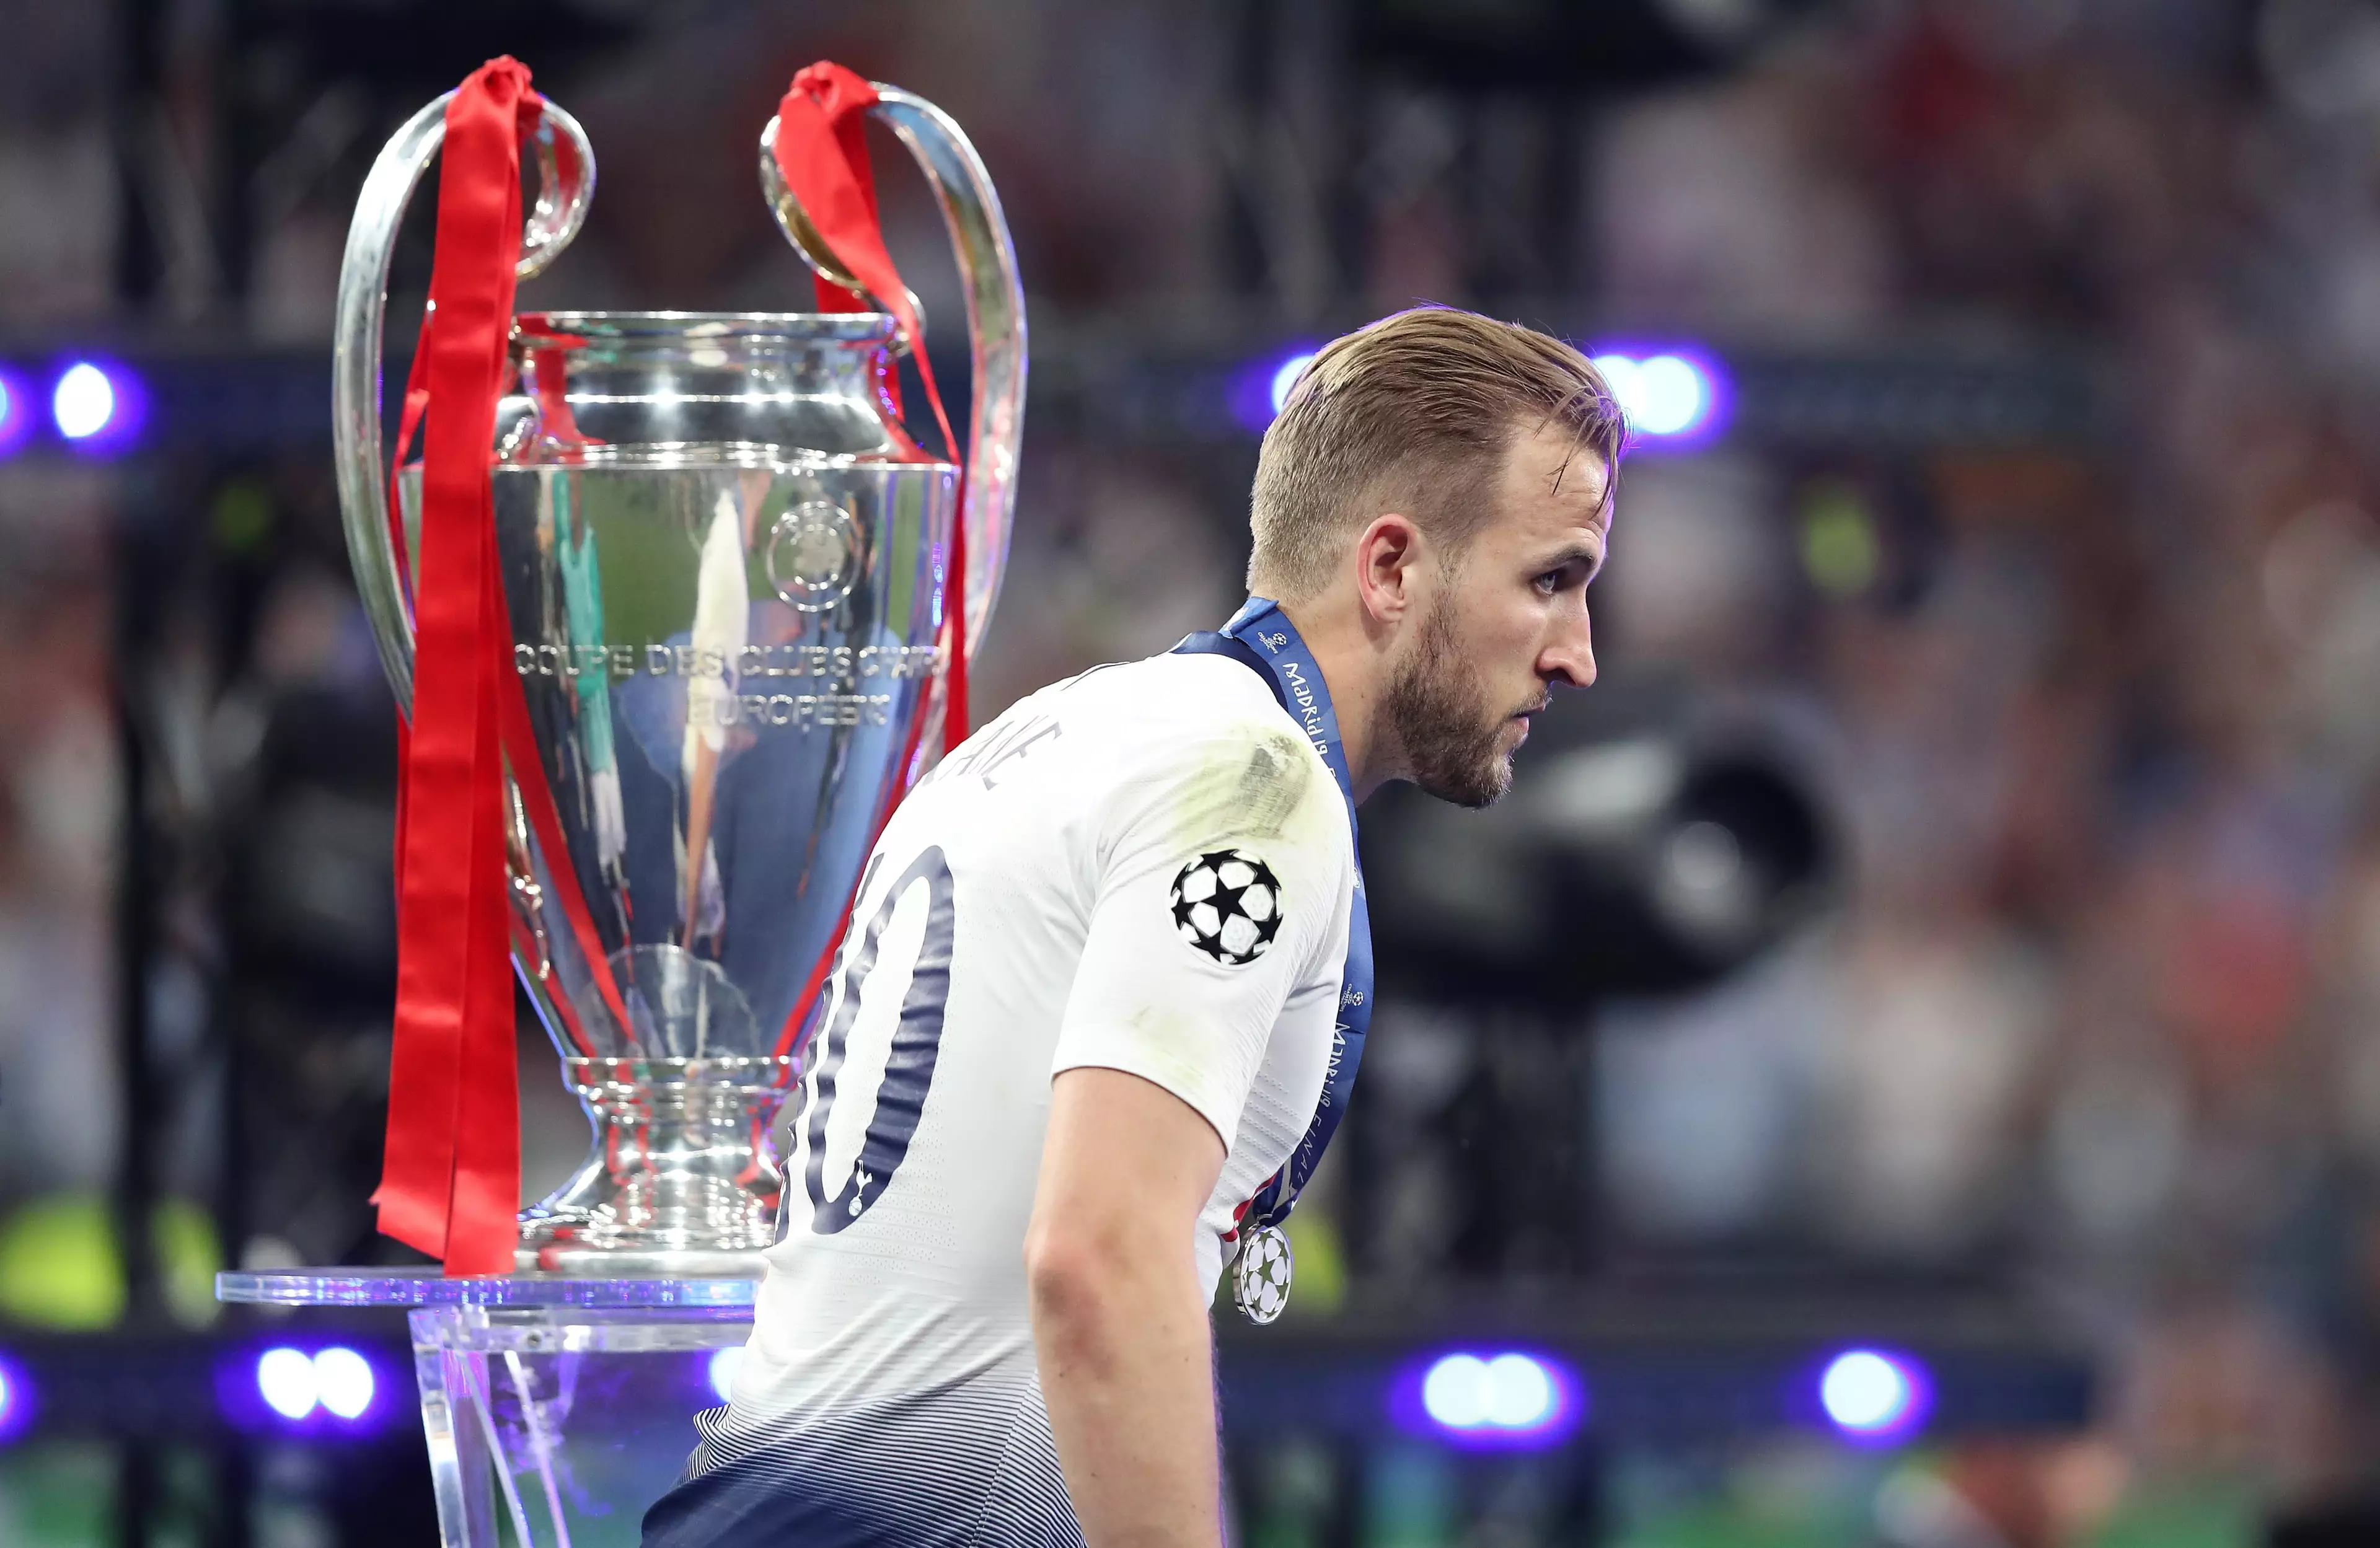 The closest Kane has come to winning a trophy so far was the 2019 Champions League final loss. Image: PA Images